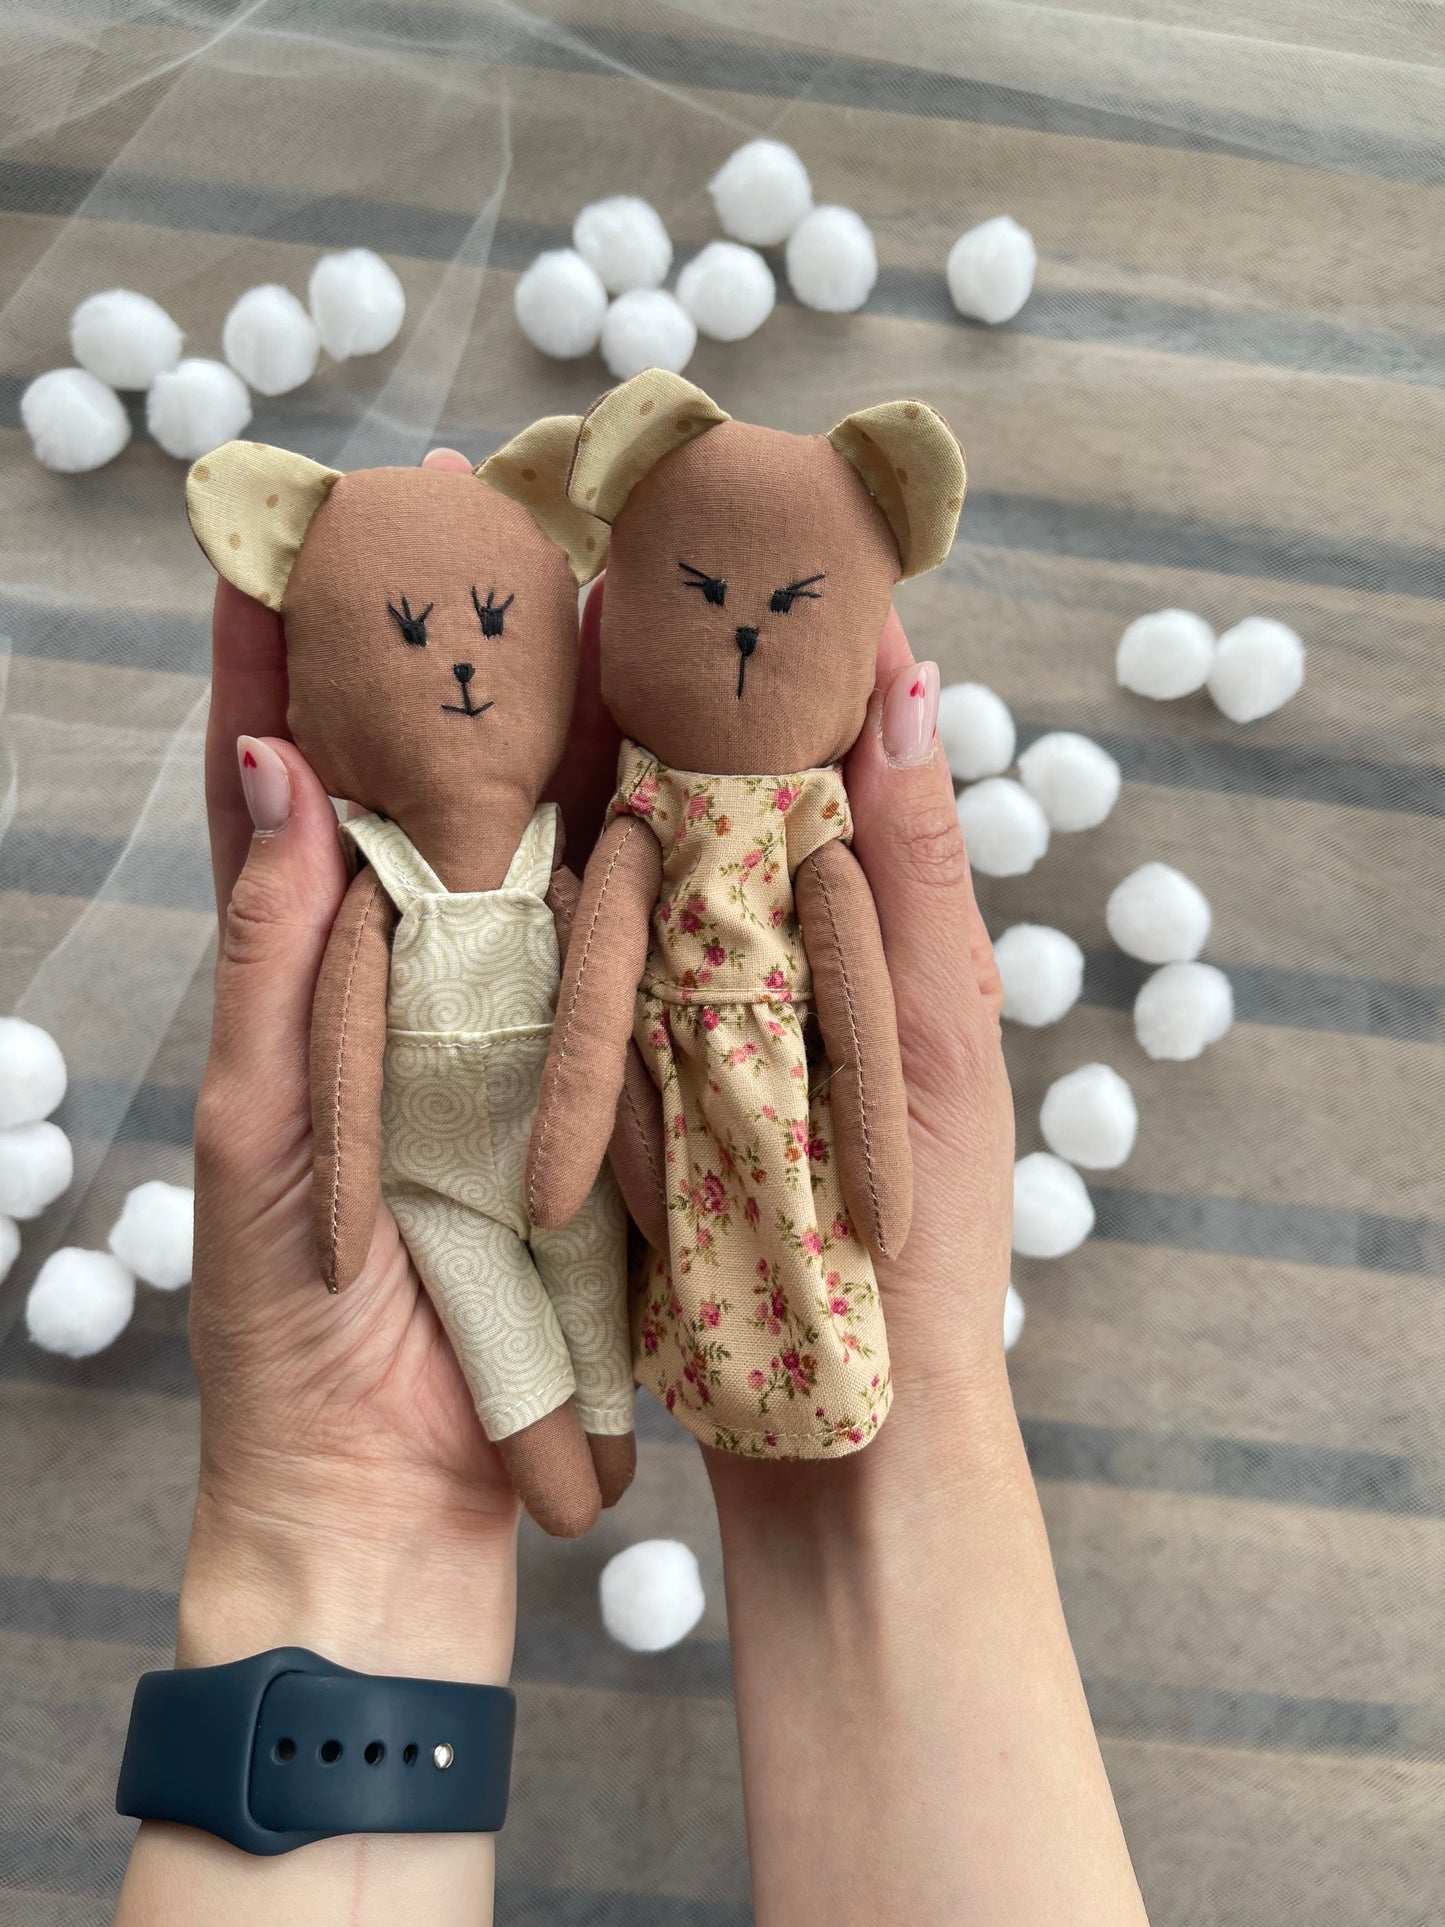 Hand-Made 100% Cotton Doll